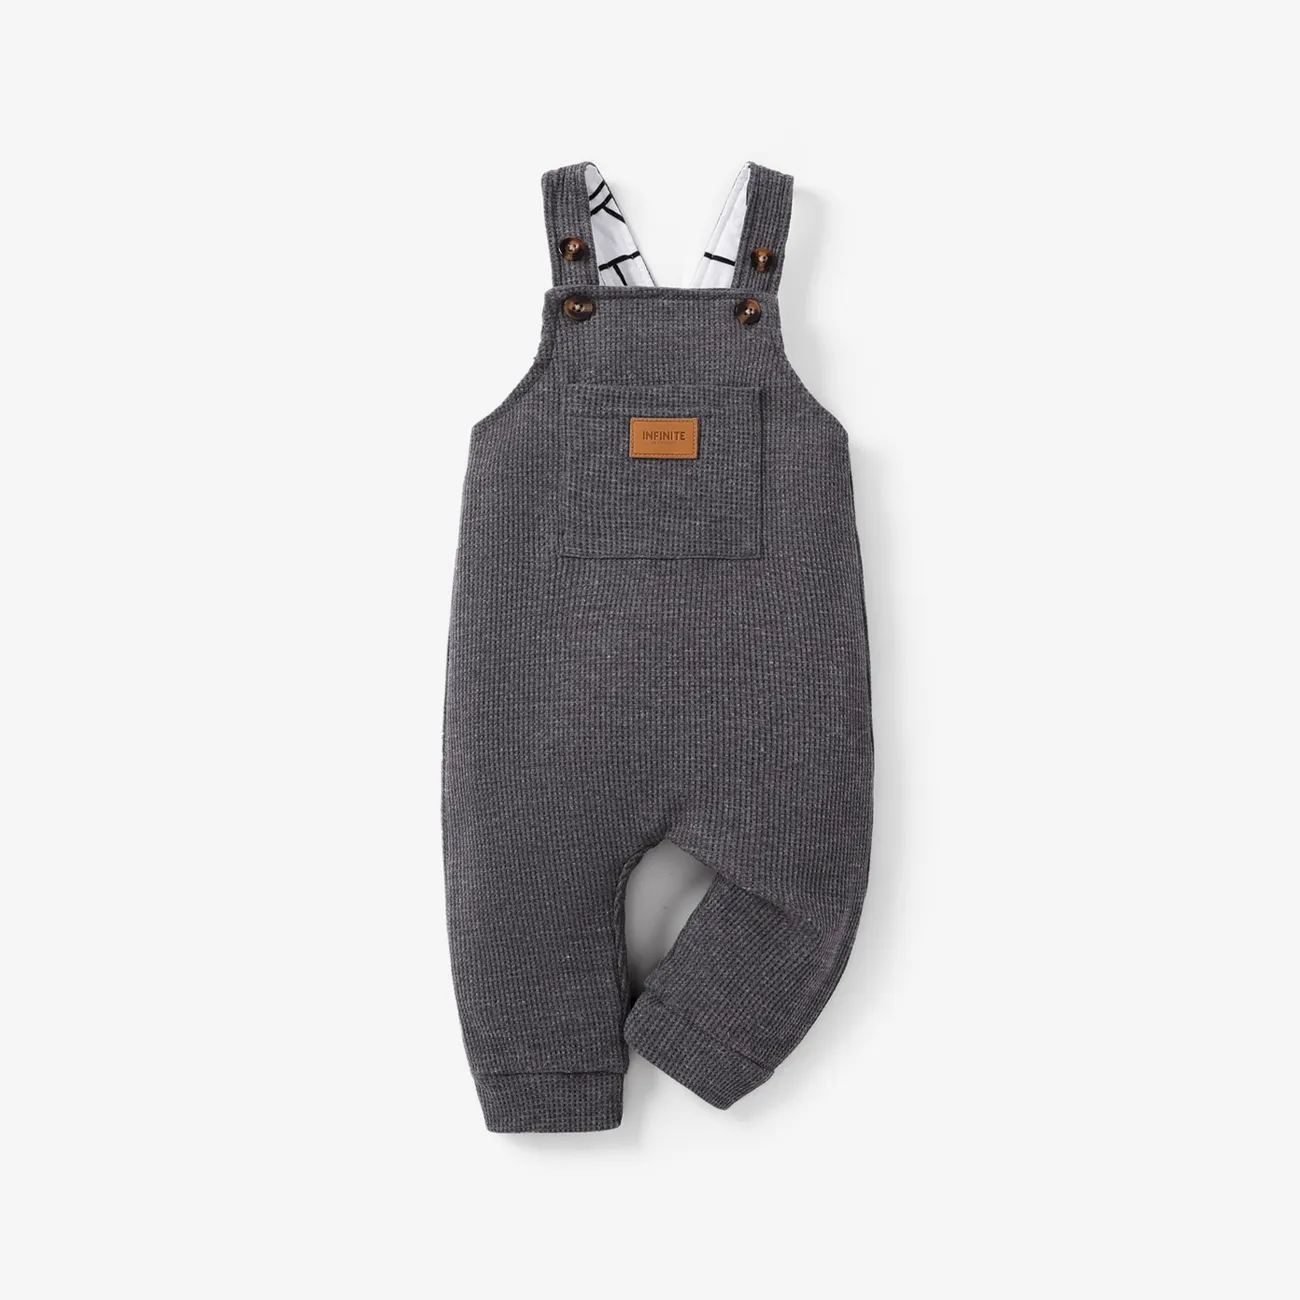 Baby Boy Waffle Letter Patched Pocket Front Overalls Grey big image 1